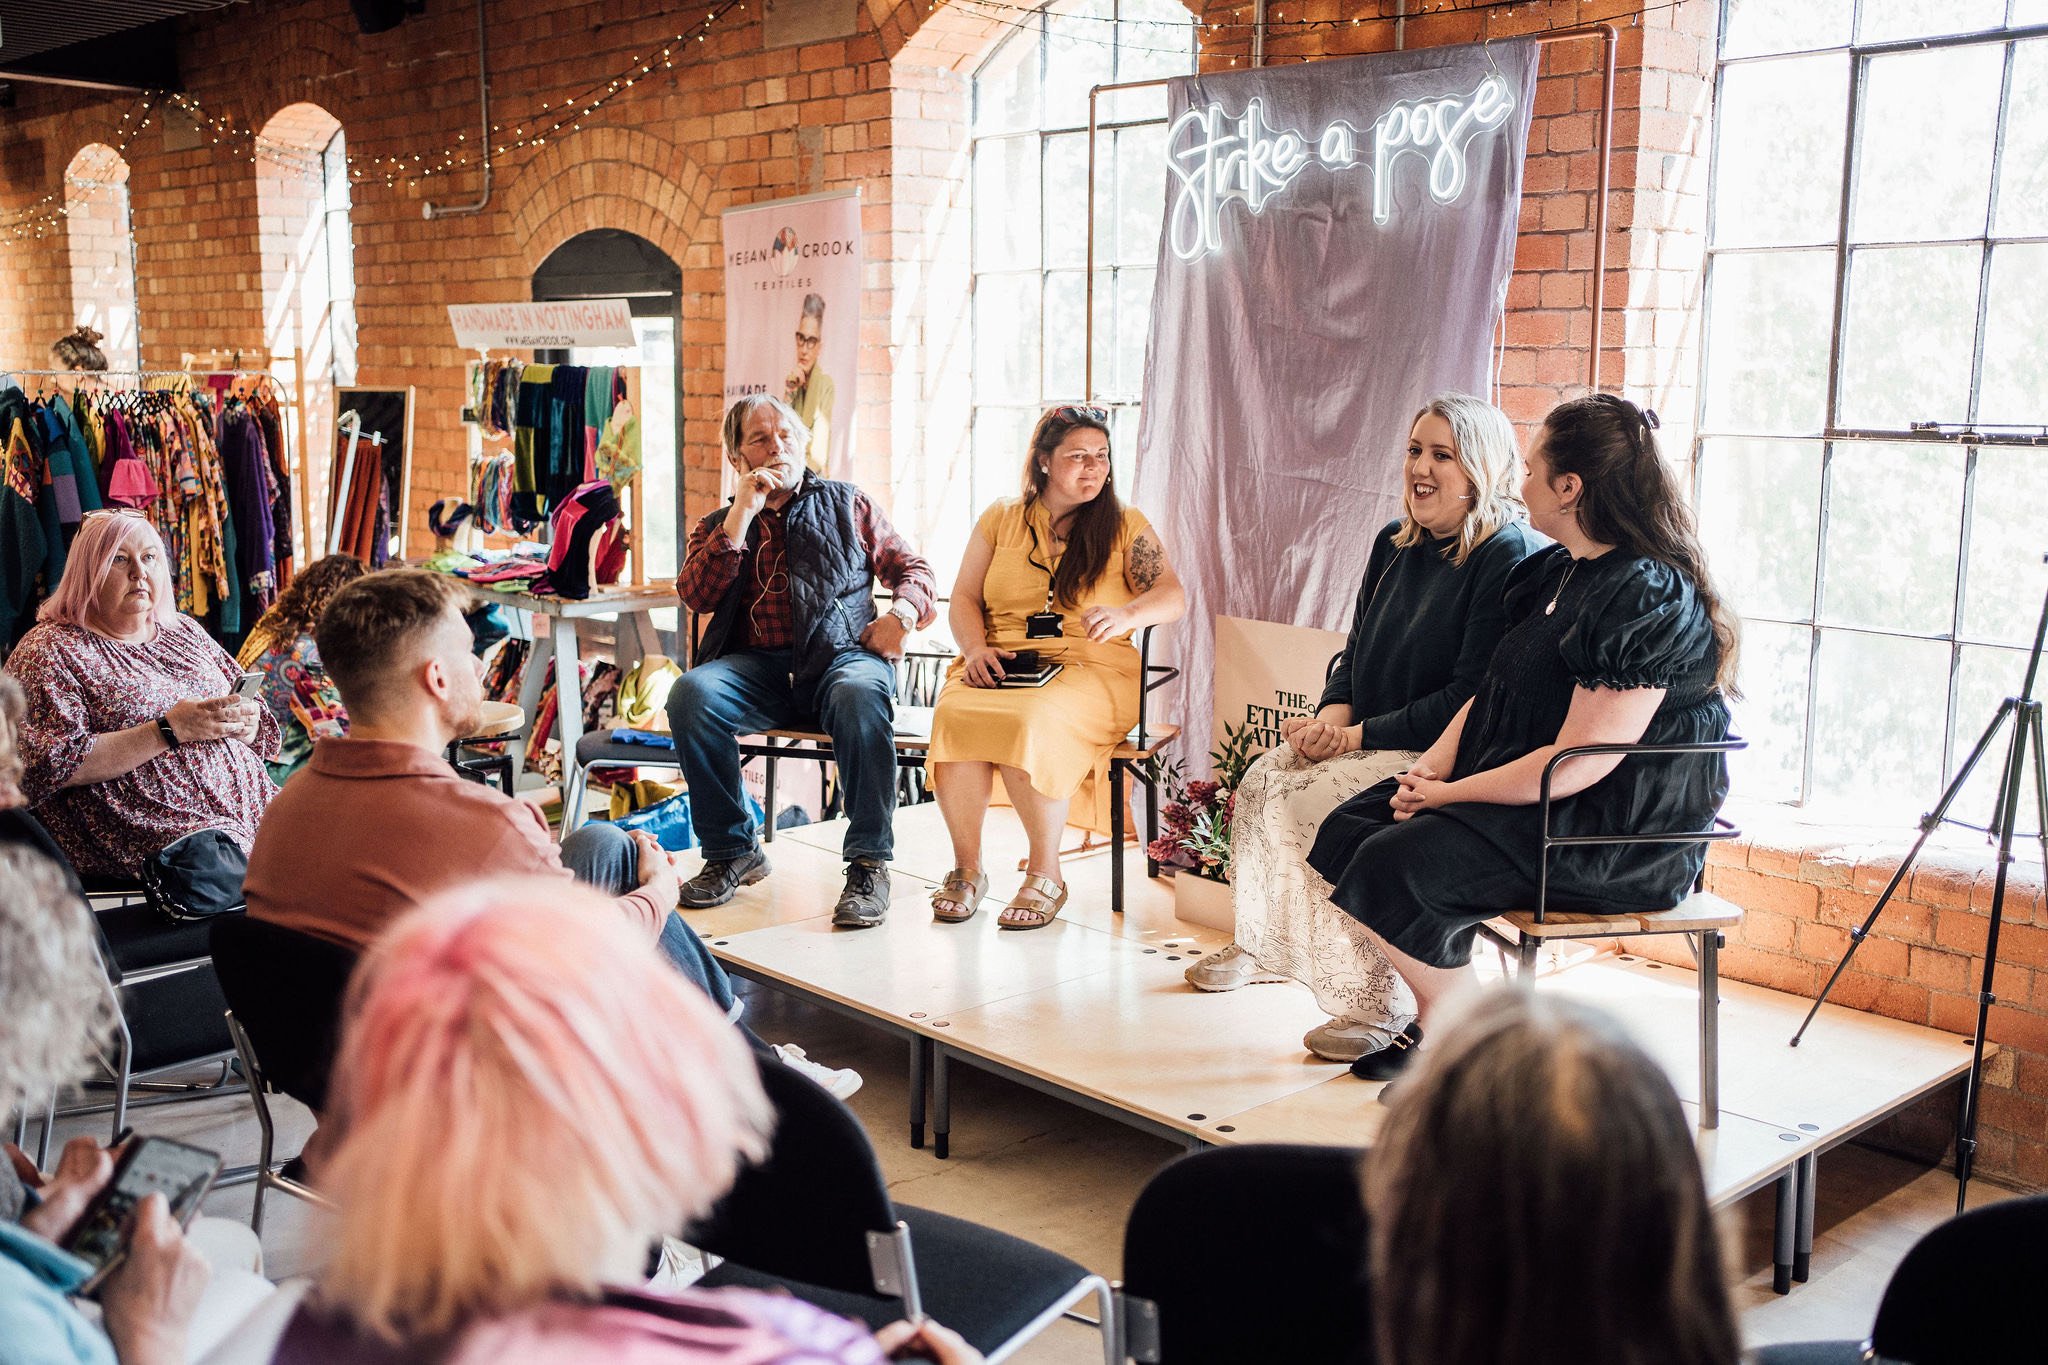     Discussions with industry experts    -   Learn first hand about sustainable fashion at   -    The Ethical Atelier  